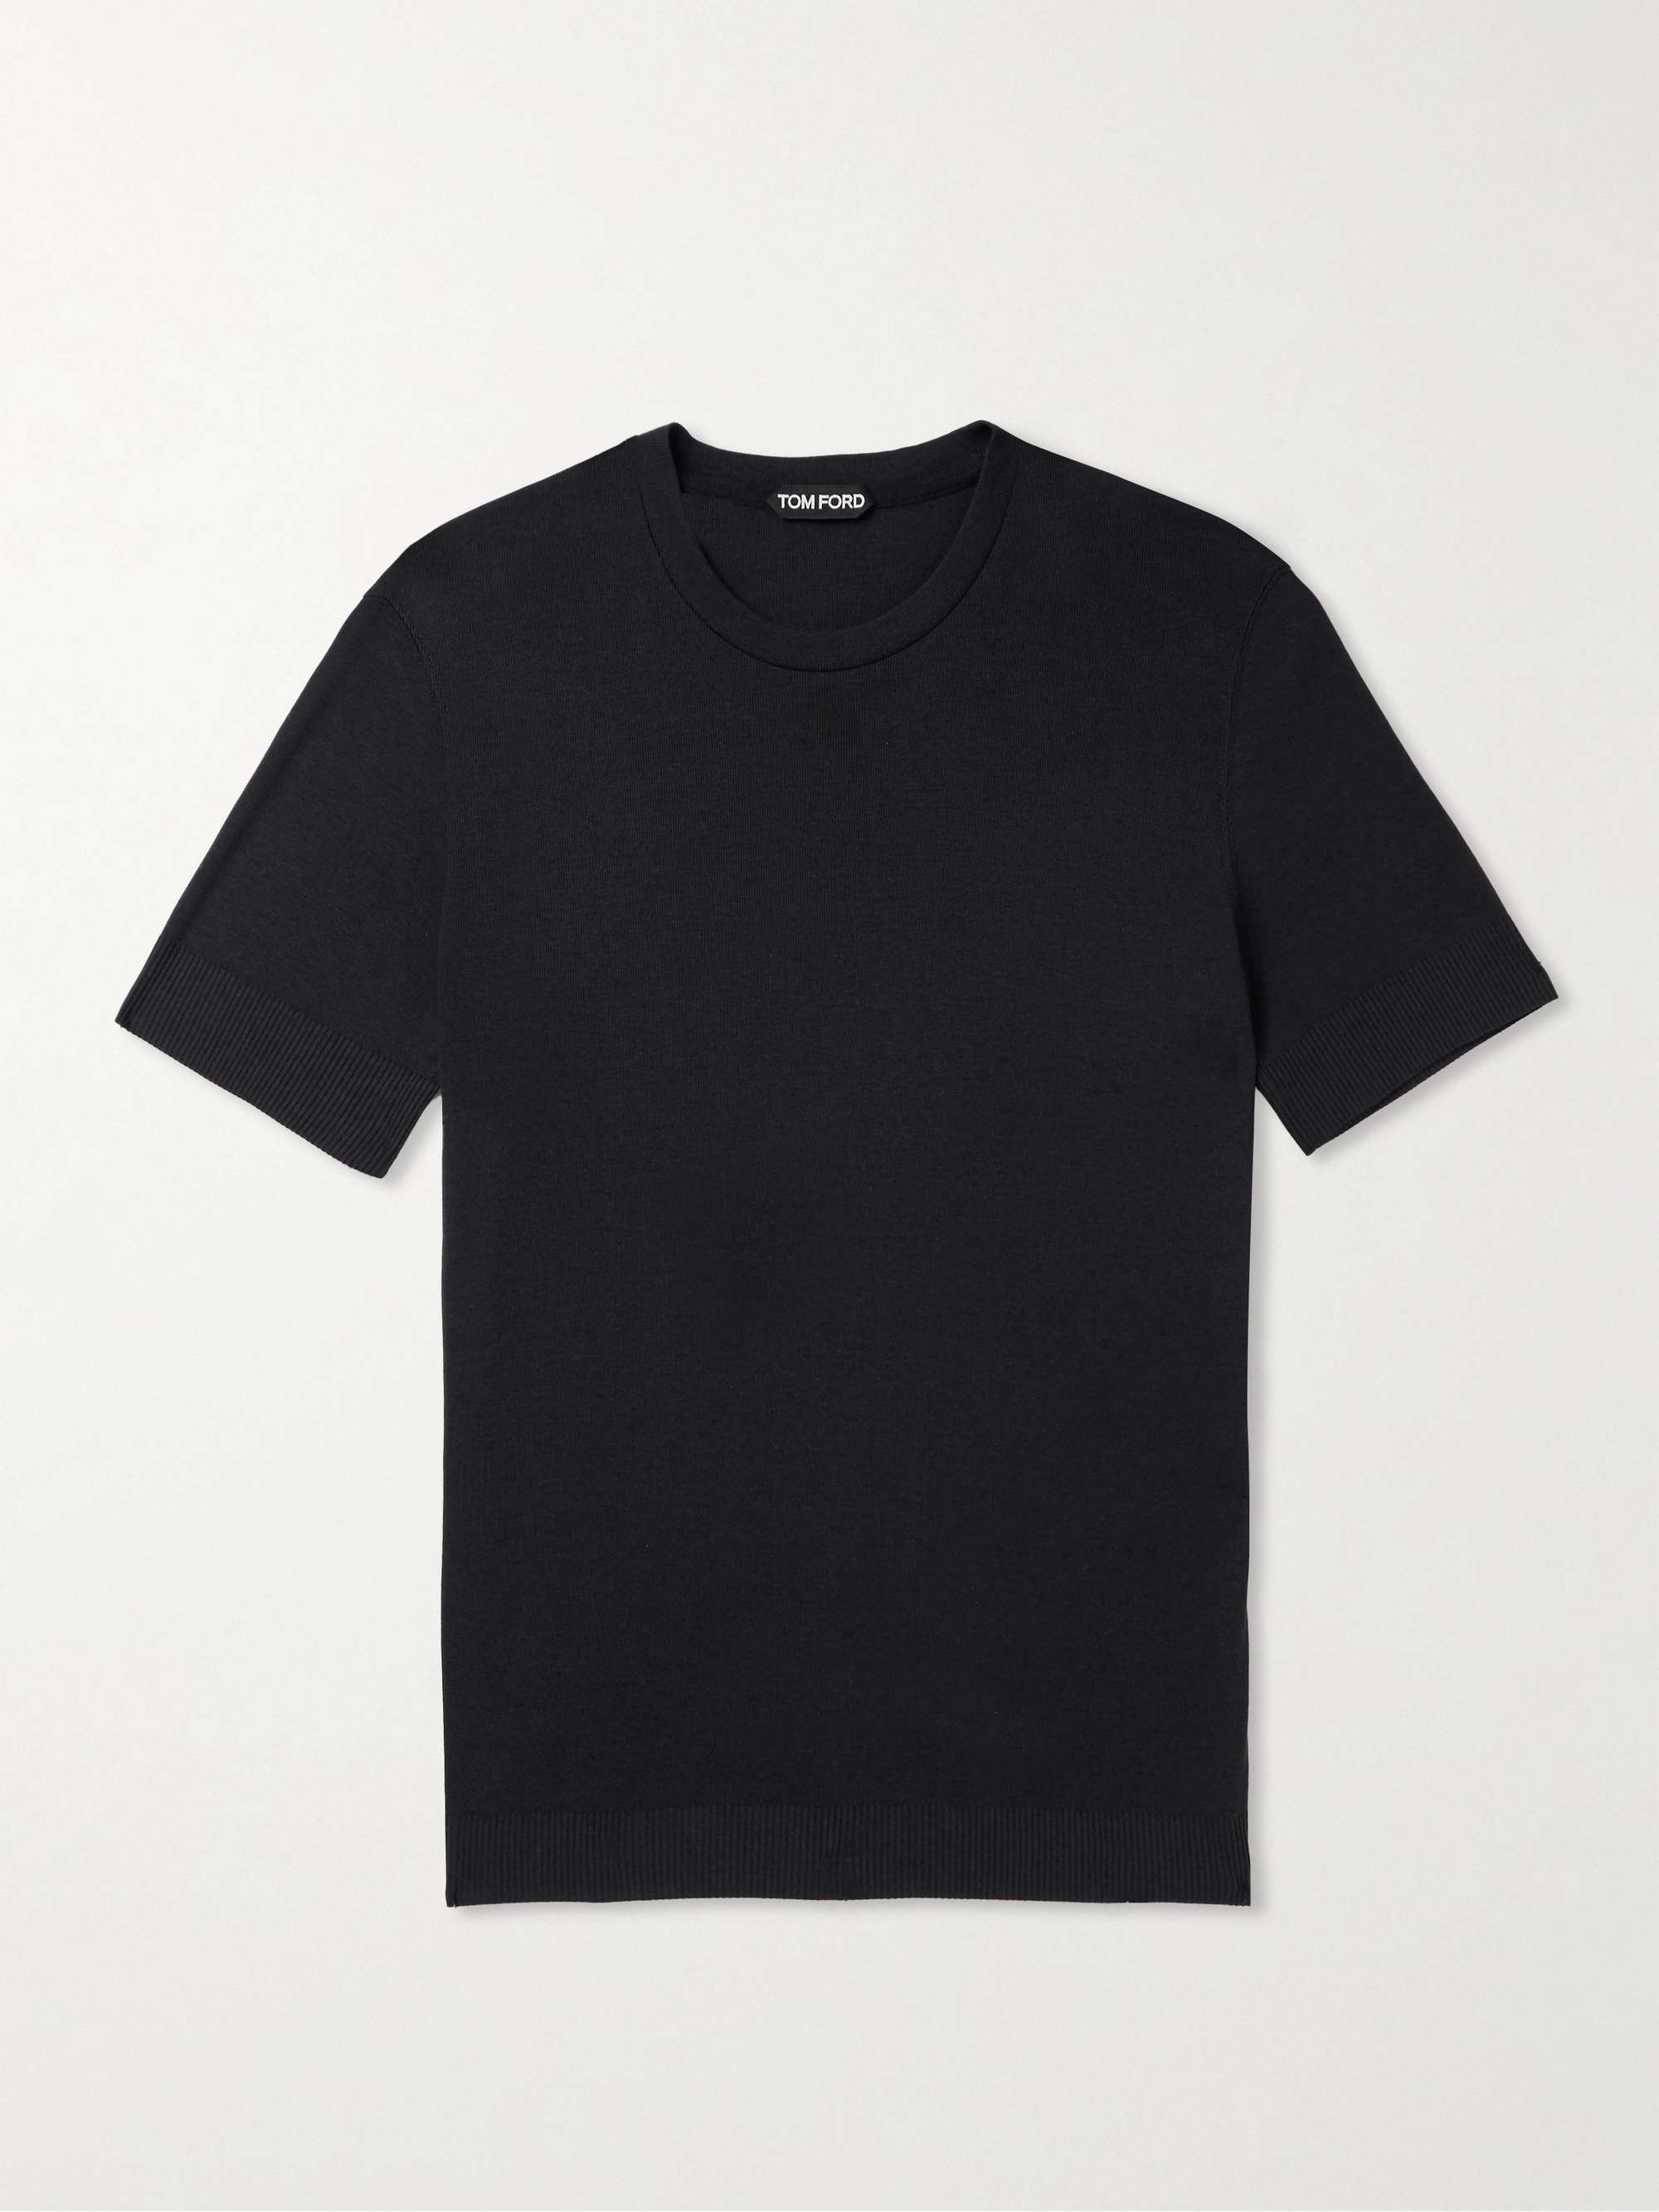 TOM FORD Placed Rib Slim-Fit Lyocell and Cotton-Blend Jersey T-Shirt